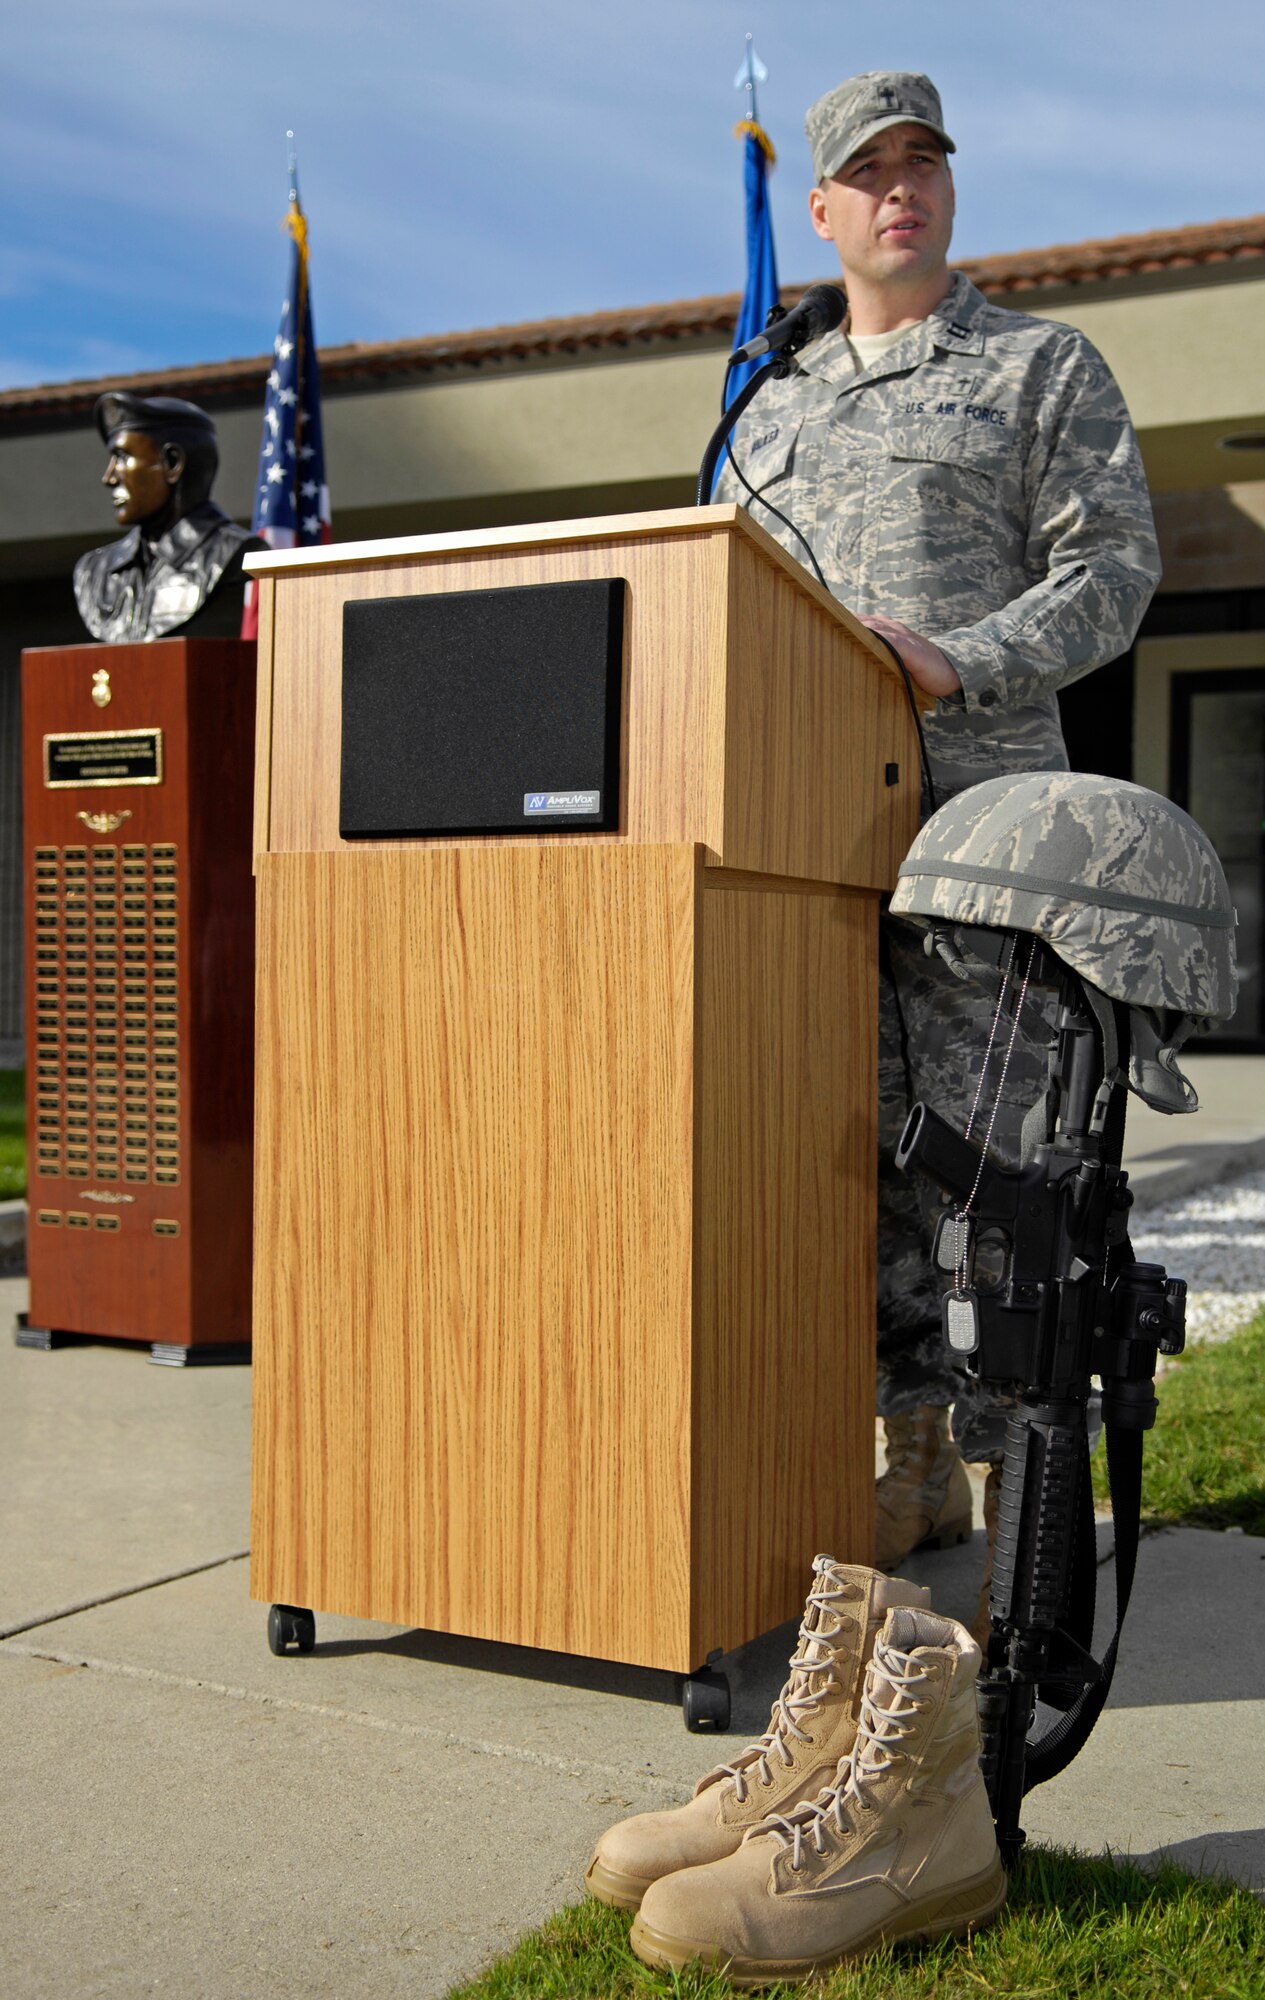 VANDENBERG AIR FORCE BASE, Calif. --  Chaplain (Capt.) Daniel Walker, from the 30th Space Wing, gives an invocation at the beginning of the 30th Security Forces Squadron's memorial ceremony here Tuesday, Nov. 10, 2009. The ceremony was in memory of two Airmen, 1st Lt. Joseph D. Helton and Airman 1st Class Jason D. Nathan, who made the ultimate sacrifice during their duties while deployed in support of Operation Iraqi Freedom. (U.S. Air Force photo/Airman 1st Class Andrew Lee) 
 